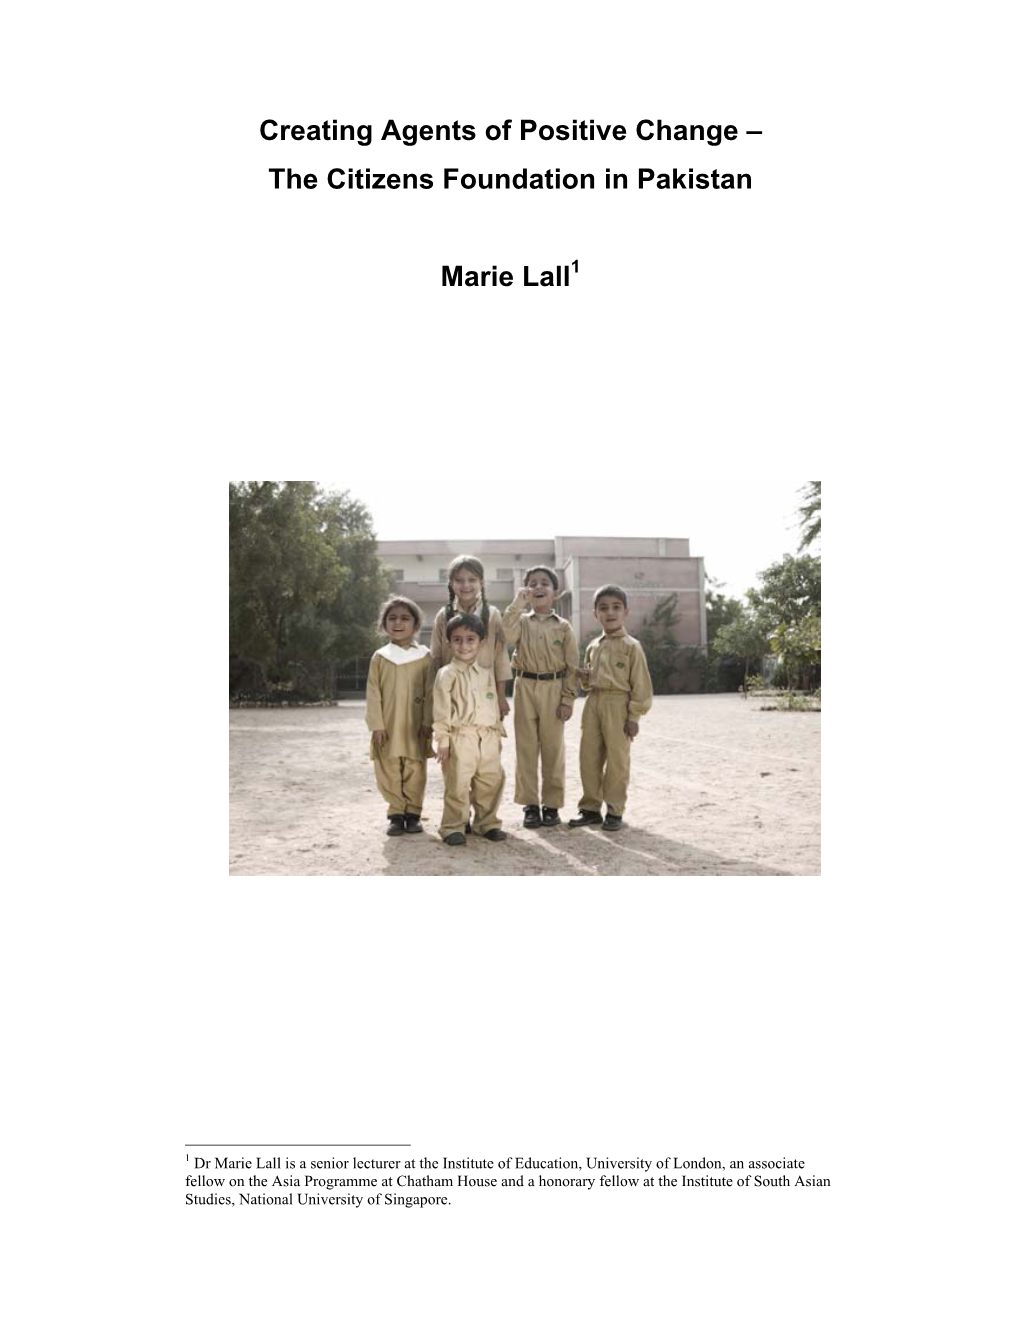 The Citizens Foundation in Pakistan Marie Lall